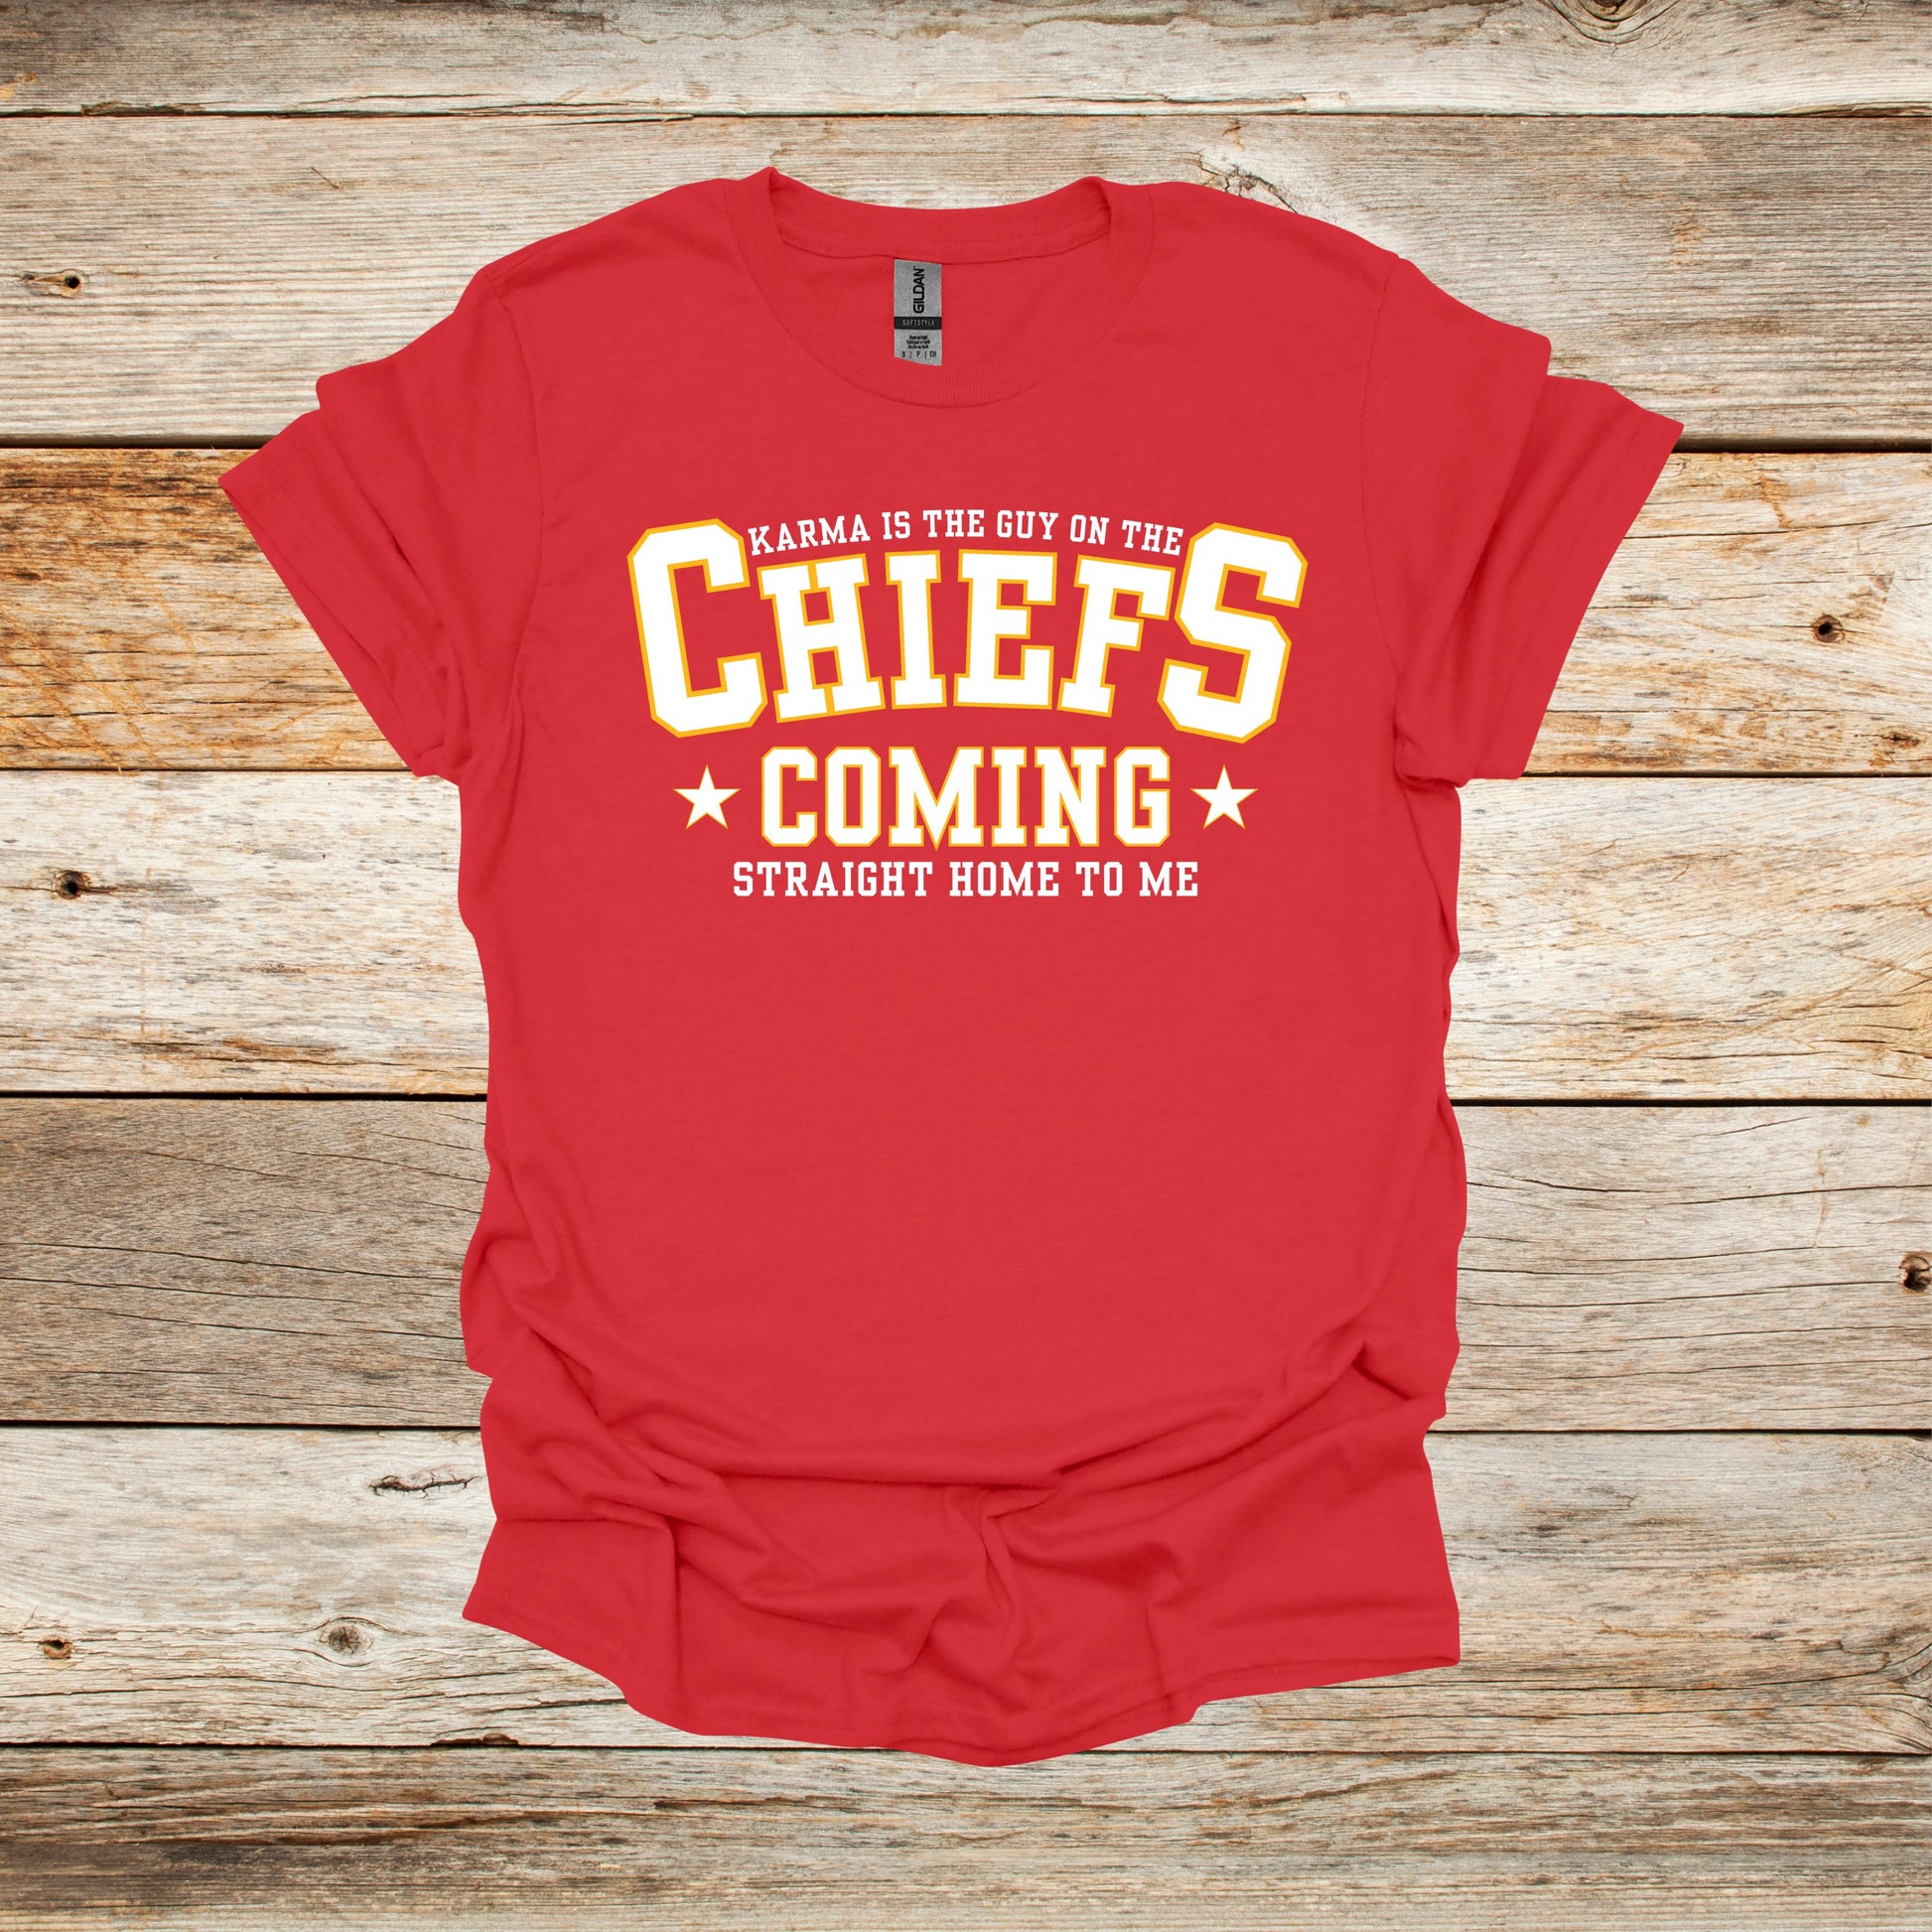 Football T-Shirt - Karma is the Guy - Chiefs Football - Adult and Children's Tee Shirts - Sports T-Shirts Graphic Avenue 